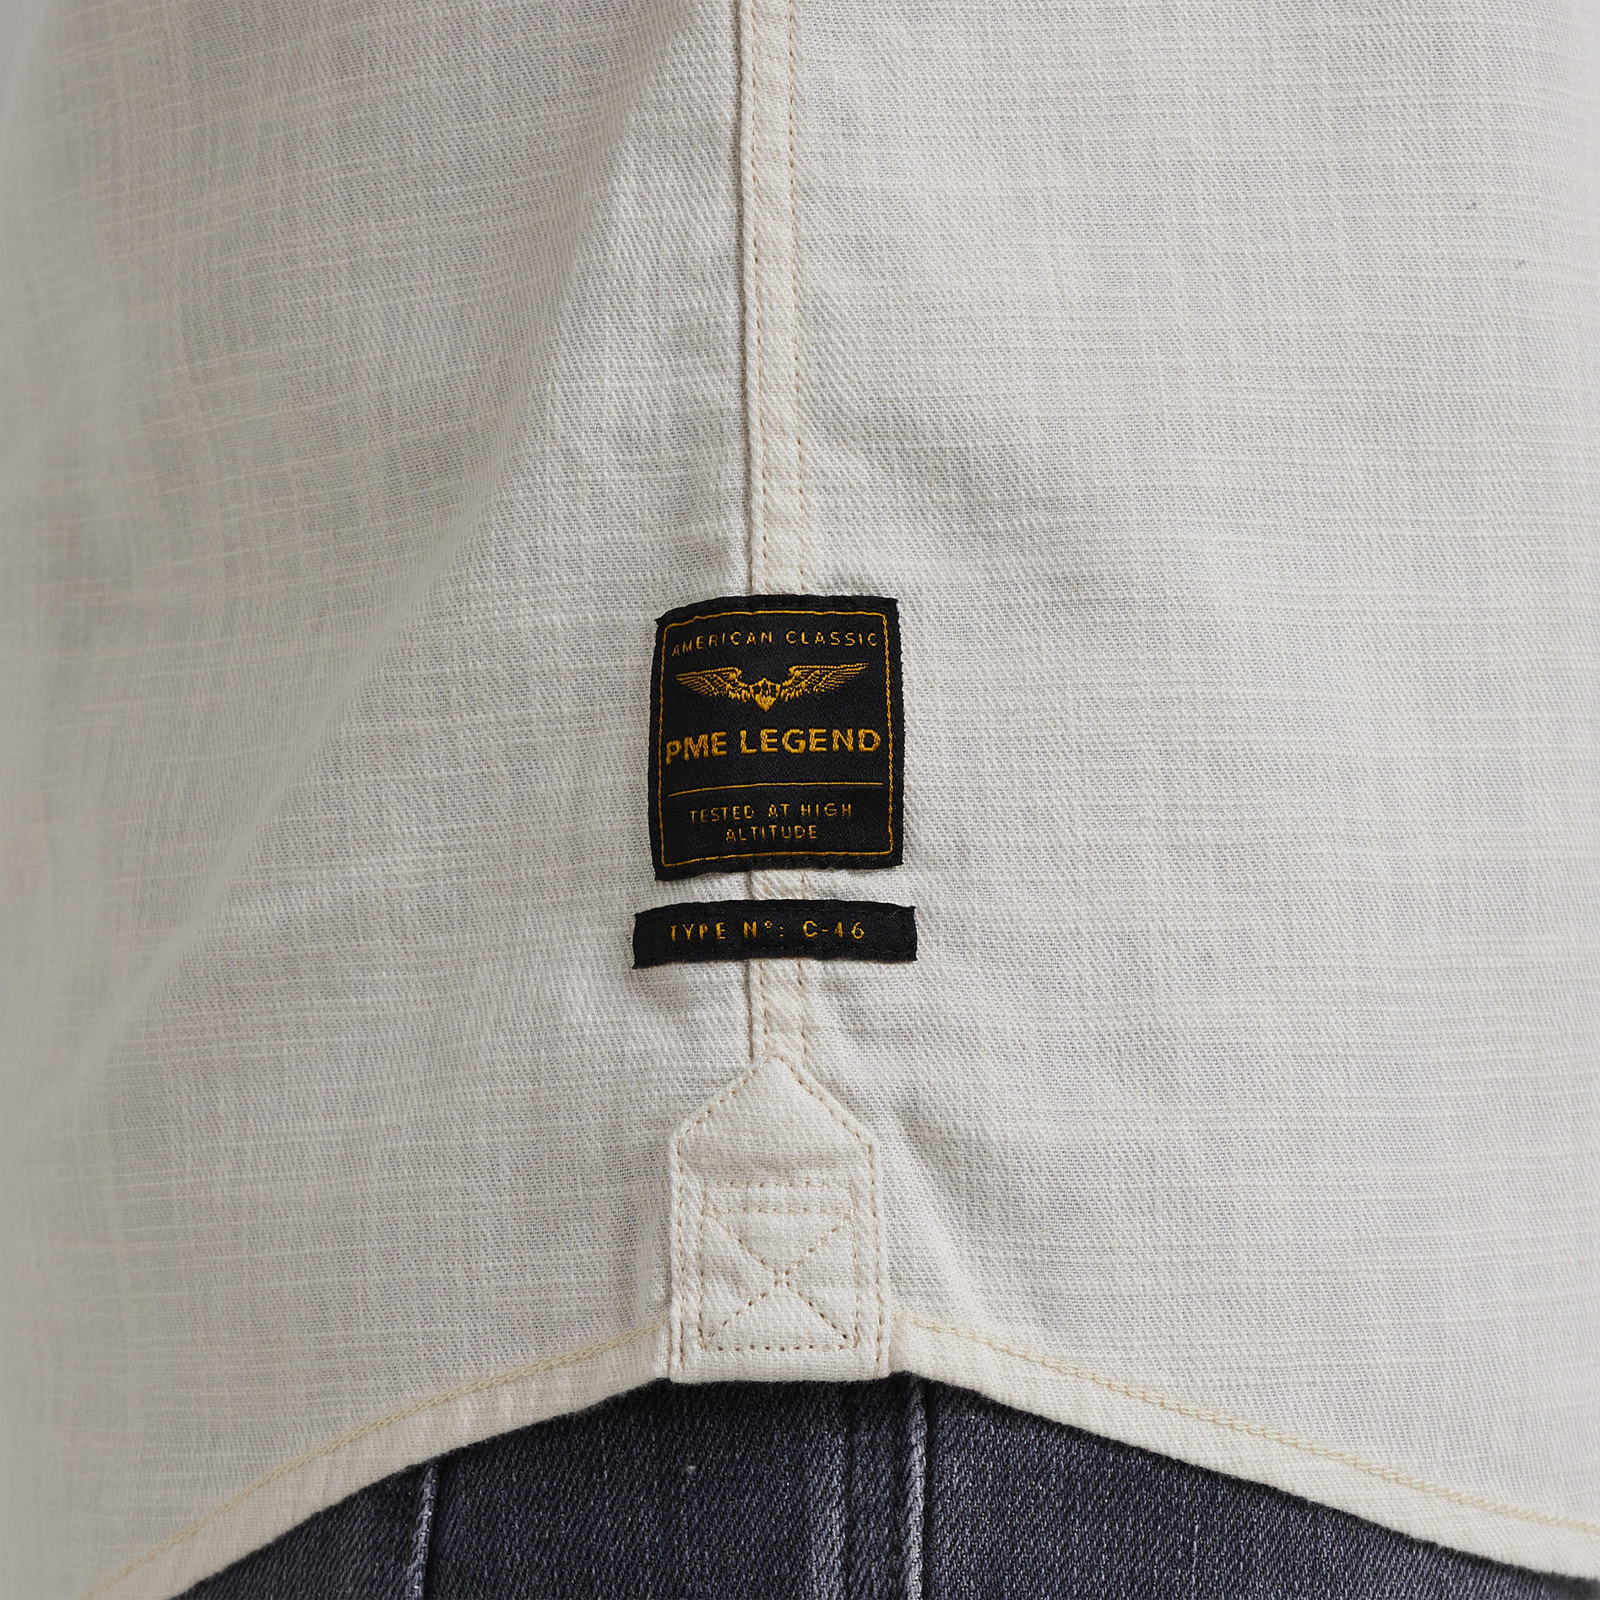 PME LEGEND | Short Sleeve Cotton Shirt | Free shipping and returns